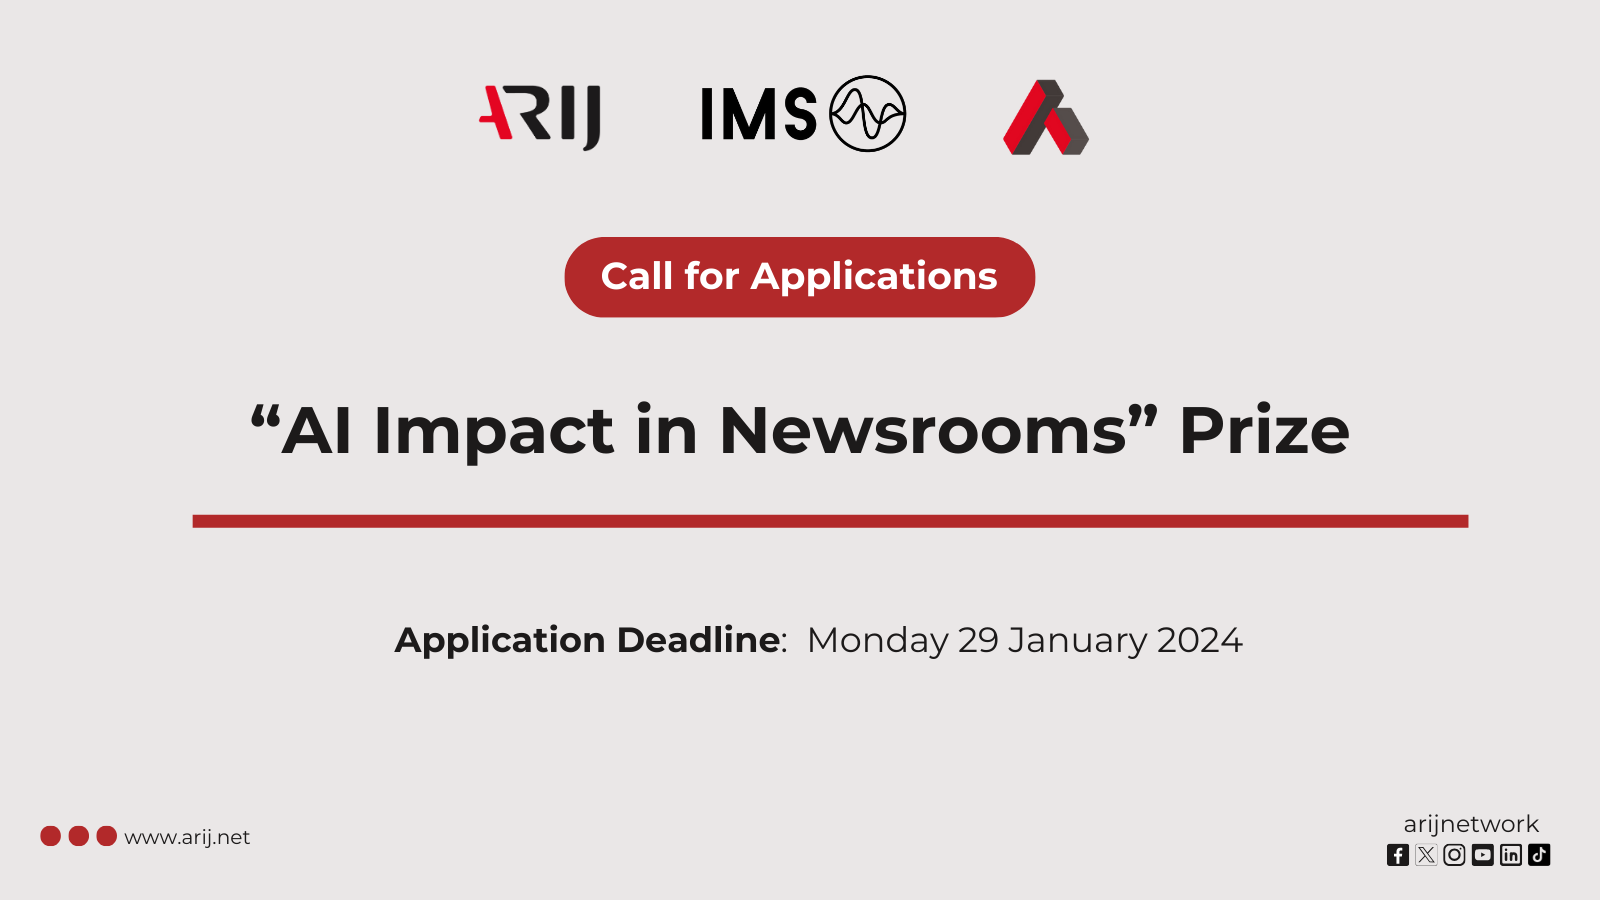 “AI Impact in Newsrooms” Prize - A Call for Applications